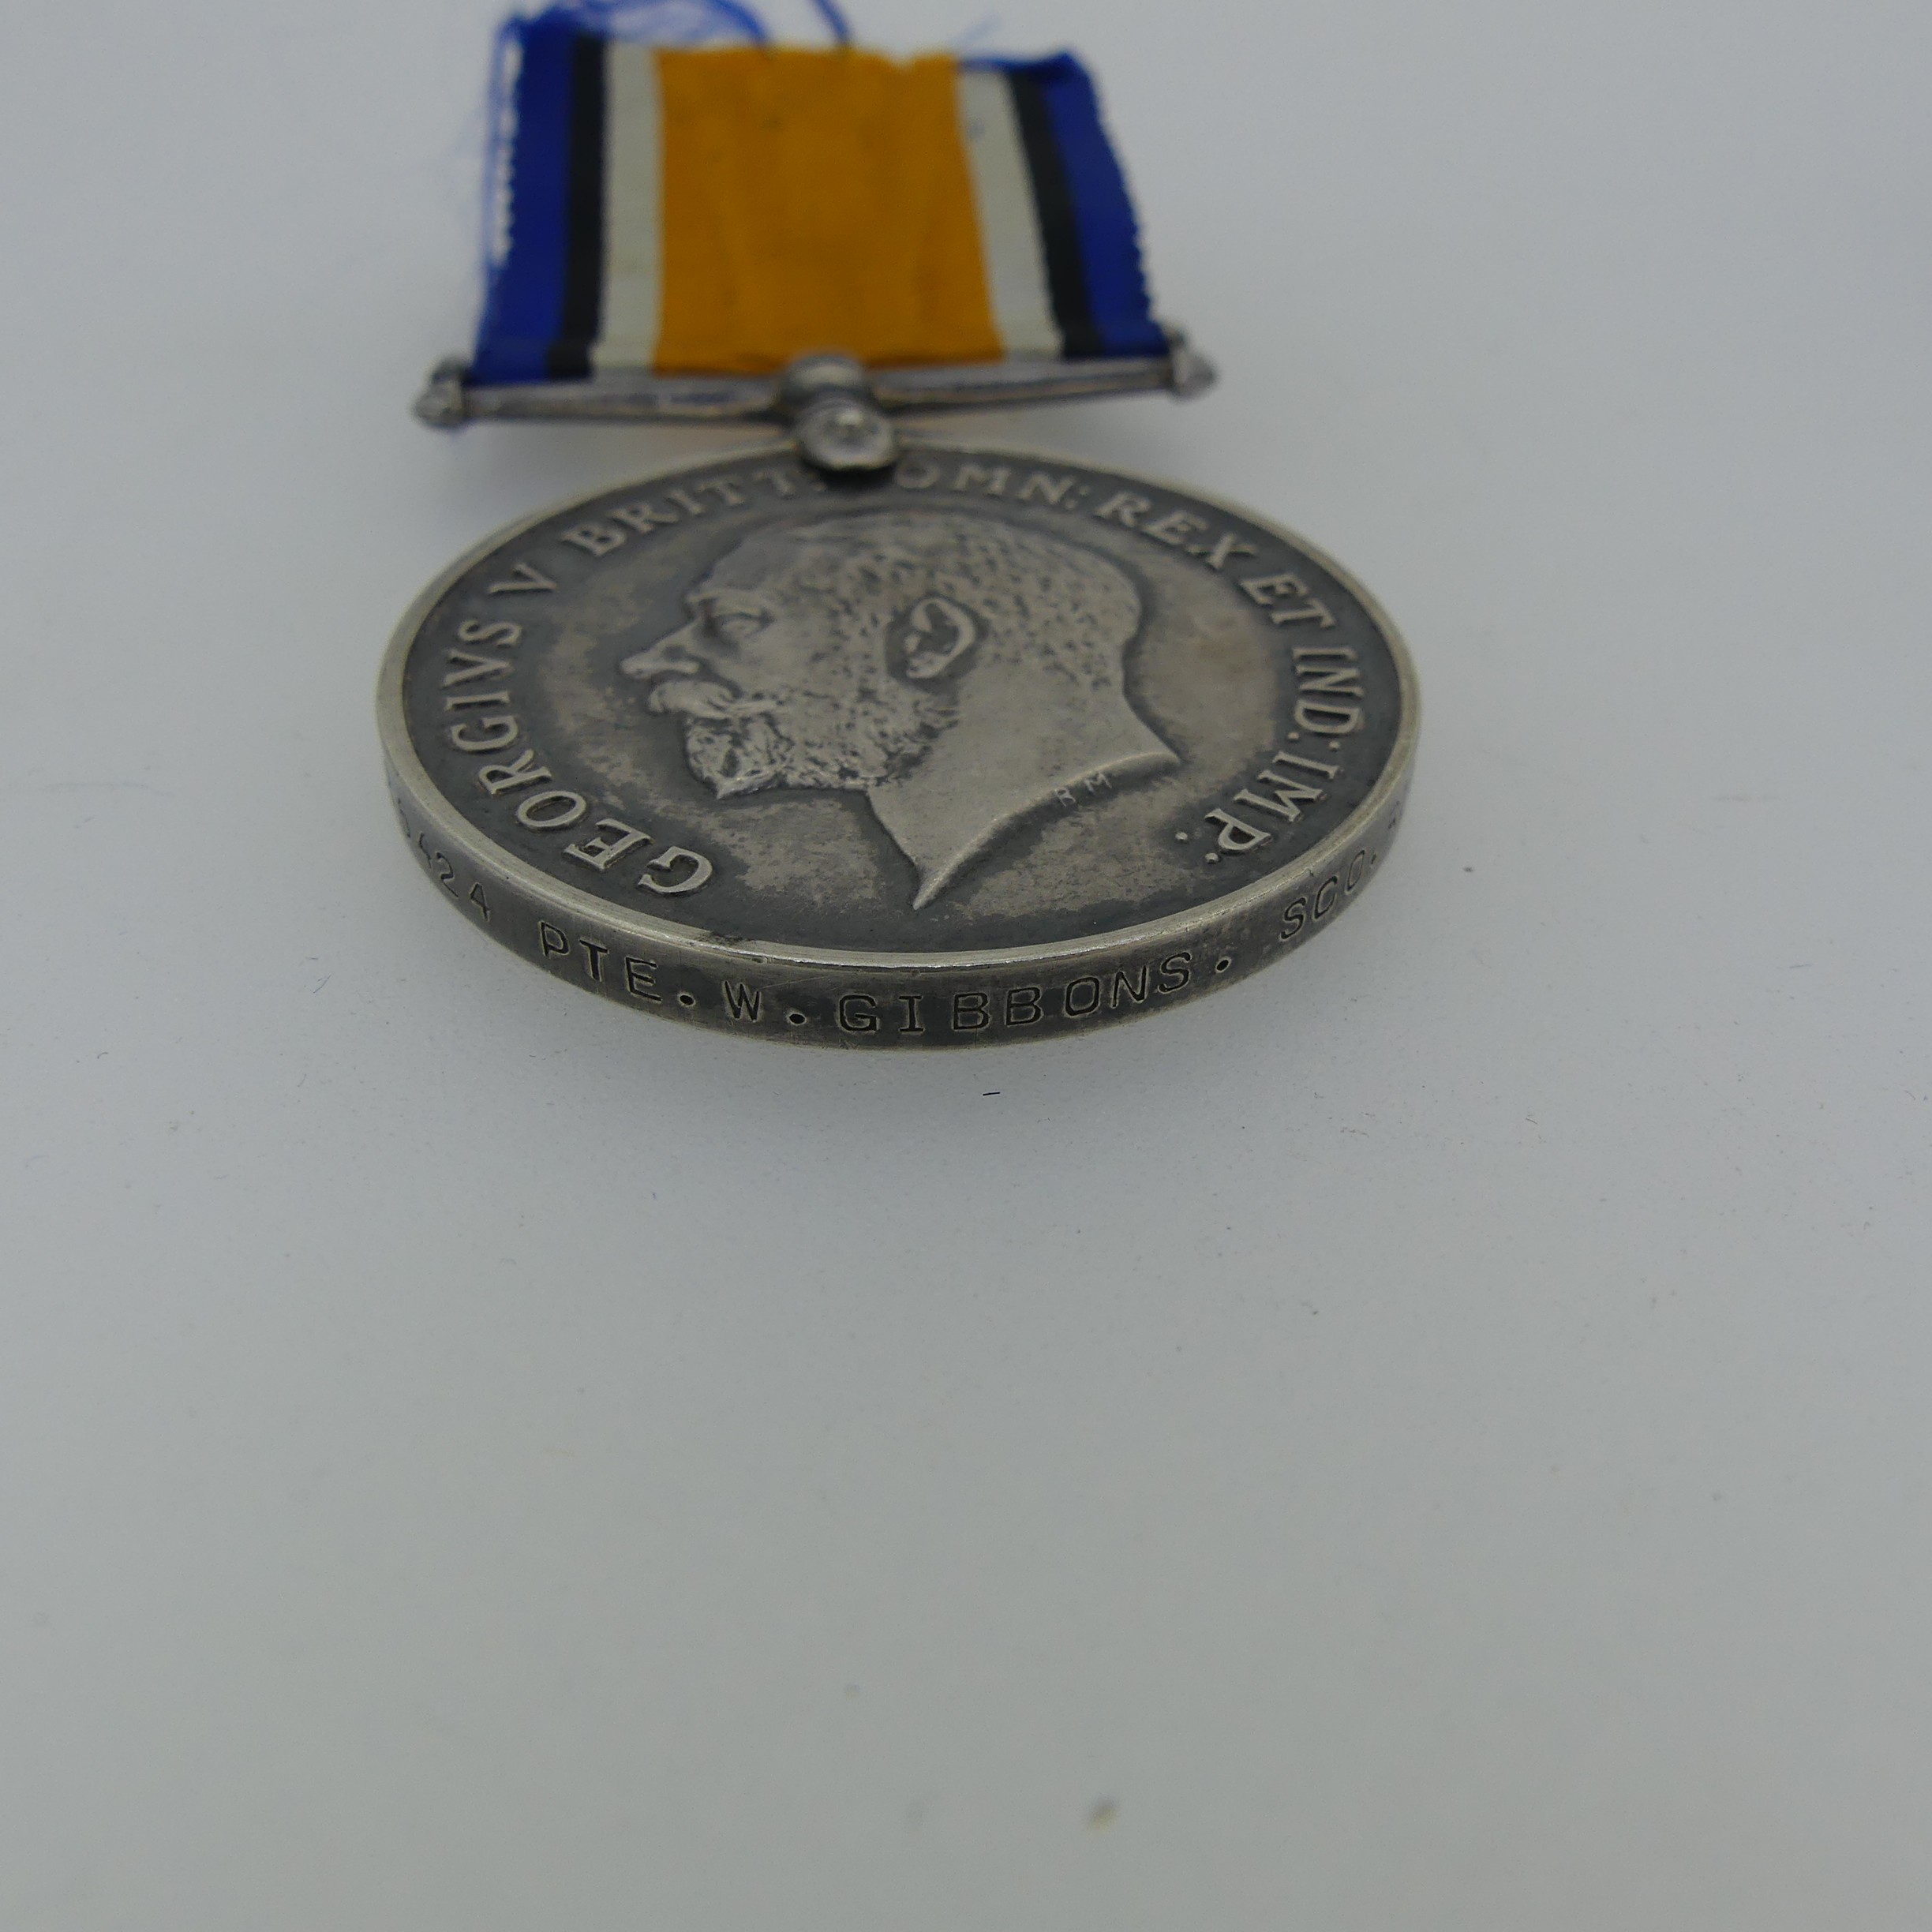 British War Medals (2) 25424 Pte. W. Gibbons Scottish Rifles and 20863 Pte. R. M. Bell Scottish - Image 4 of 4